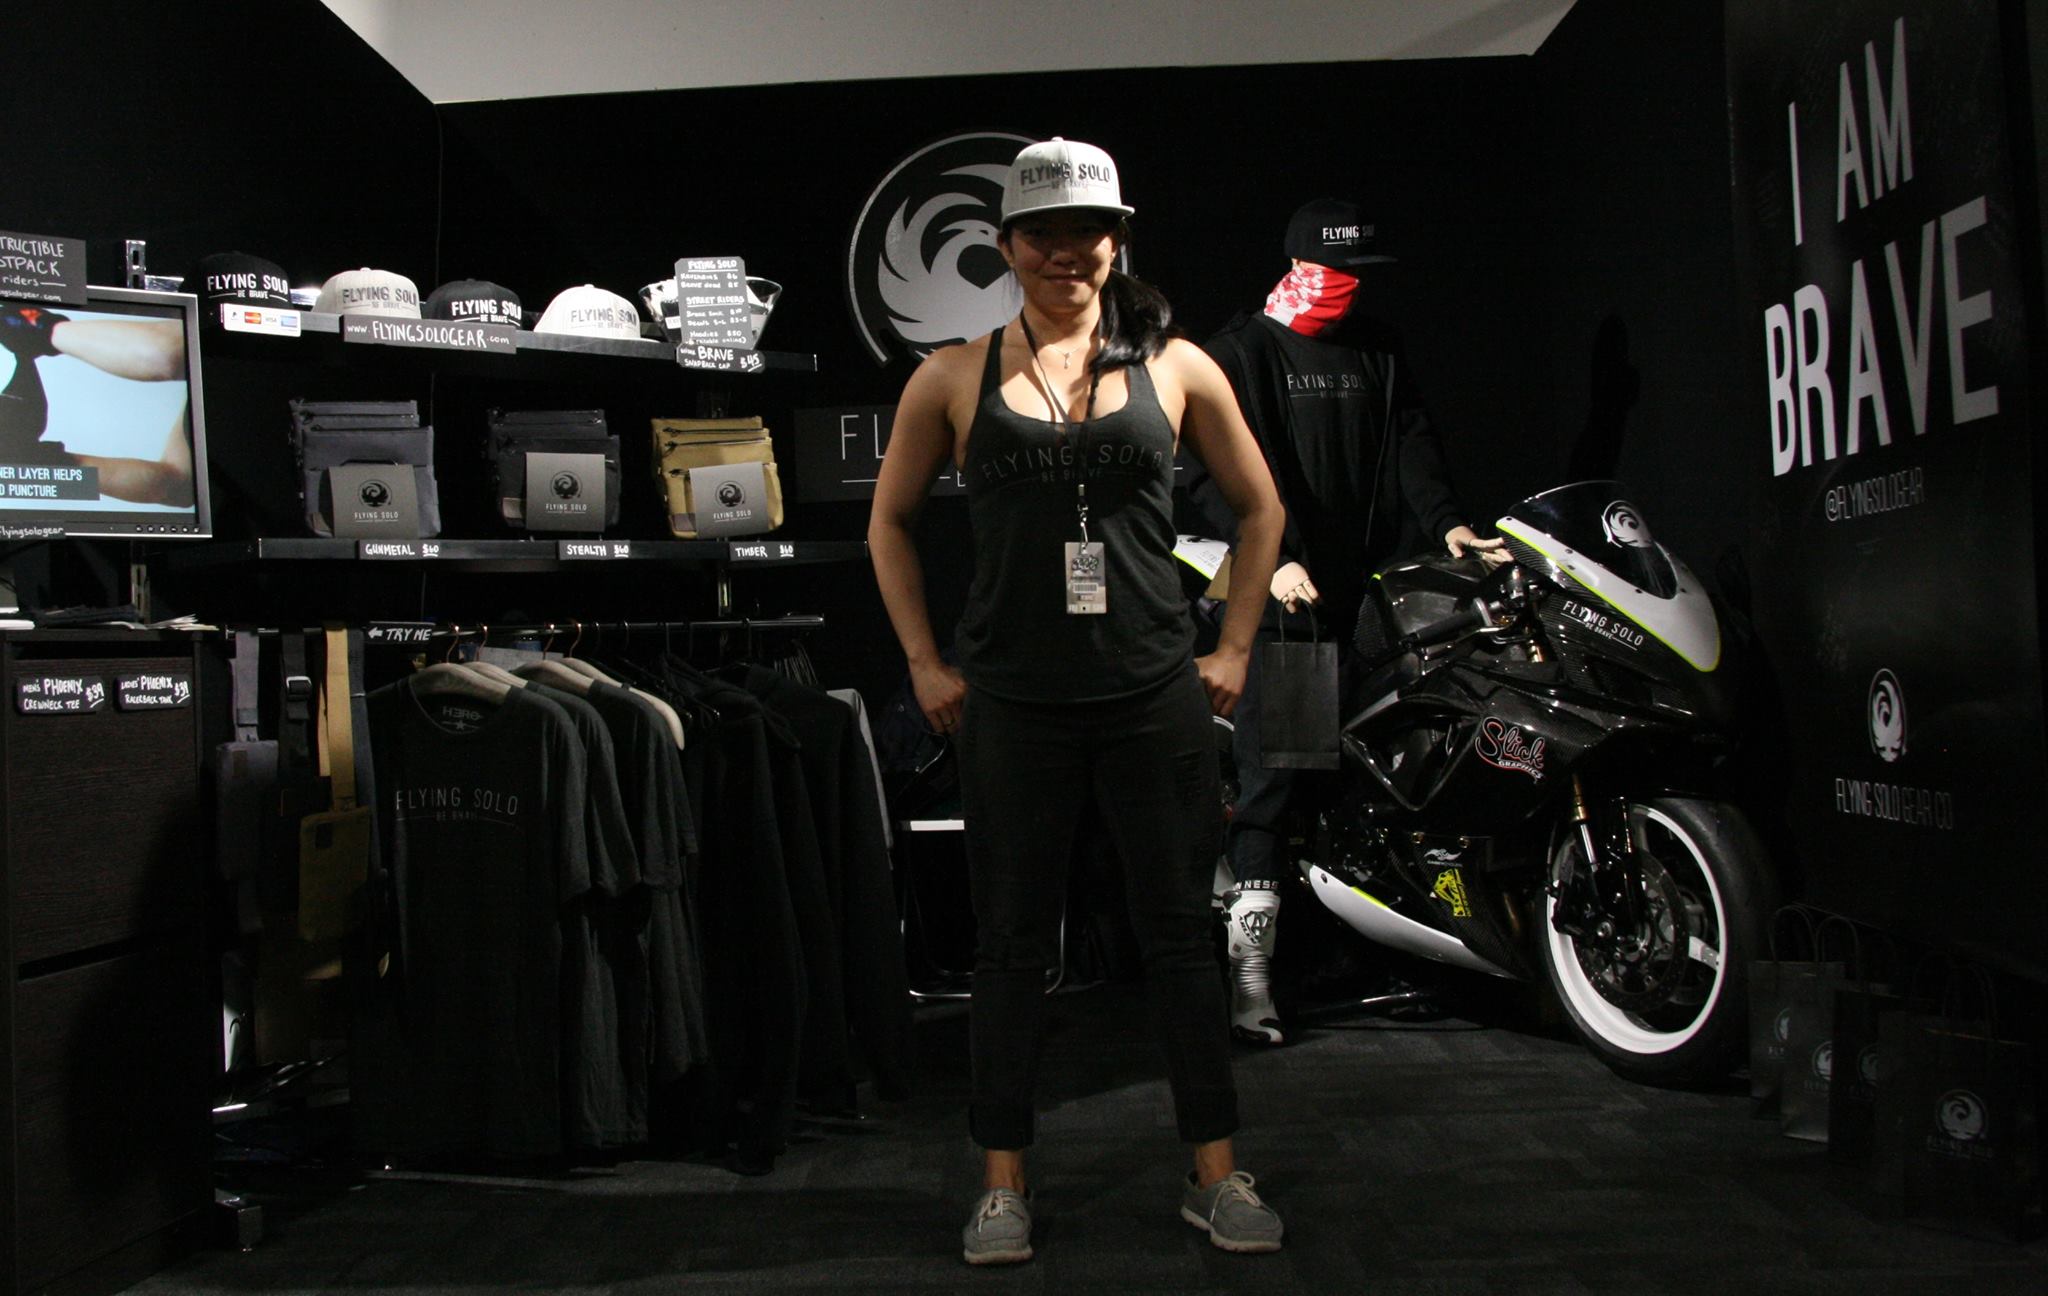 Flying Solo Gear Co to attend Australian Motorcycle Expo for 2nd year - Flying Solo Gear Company